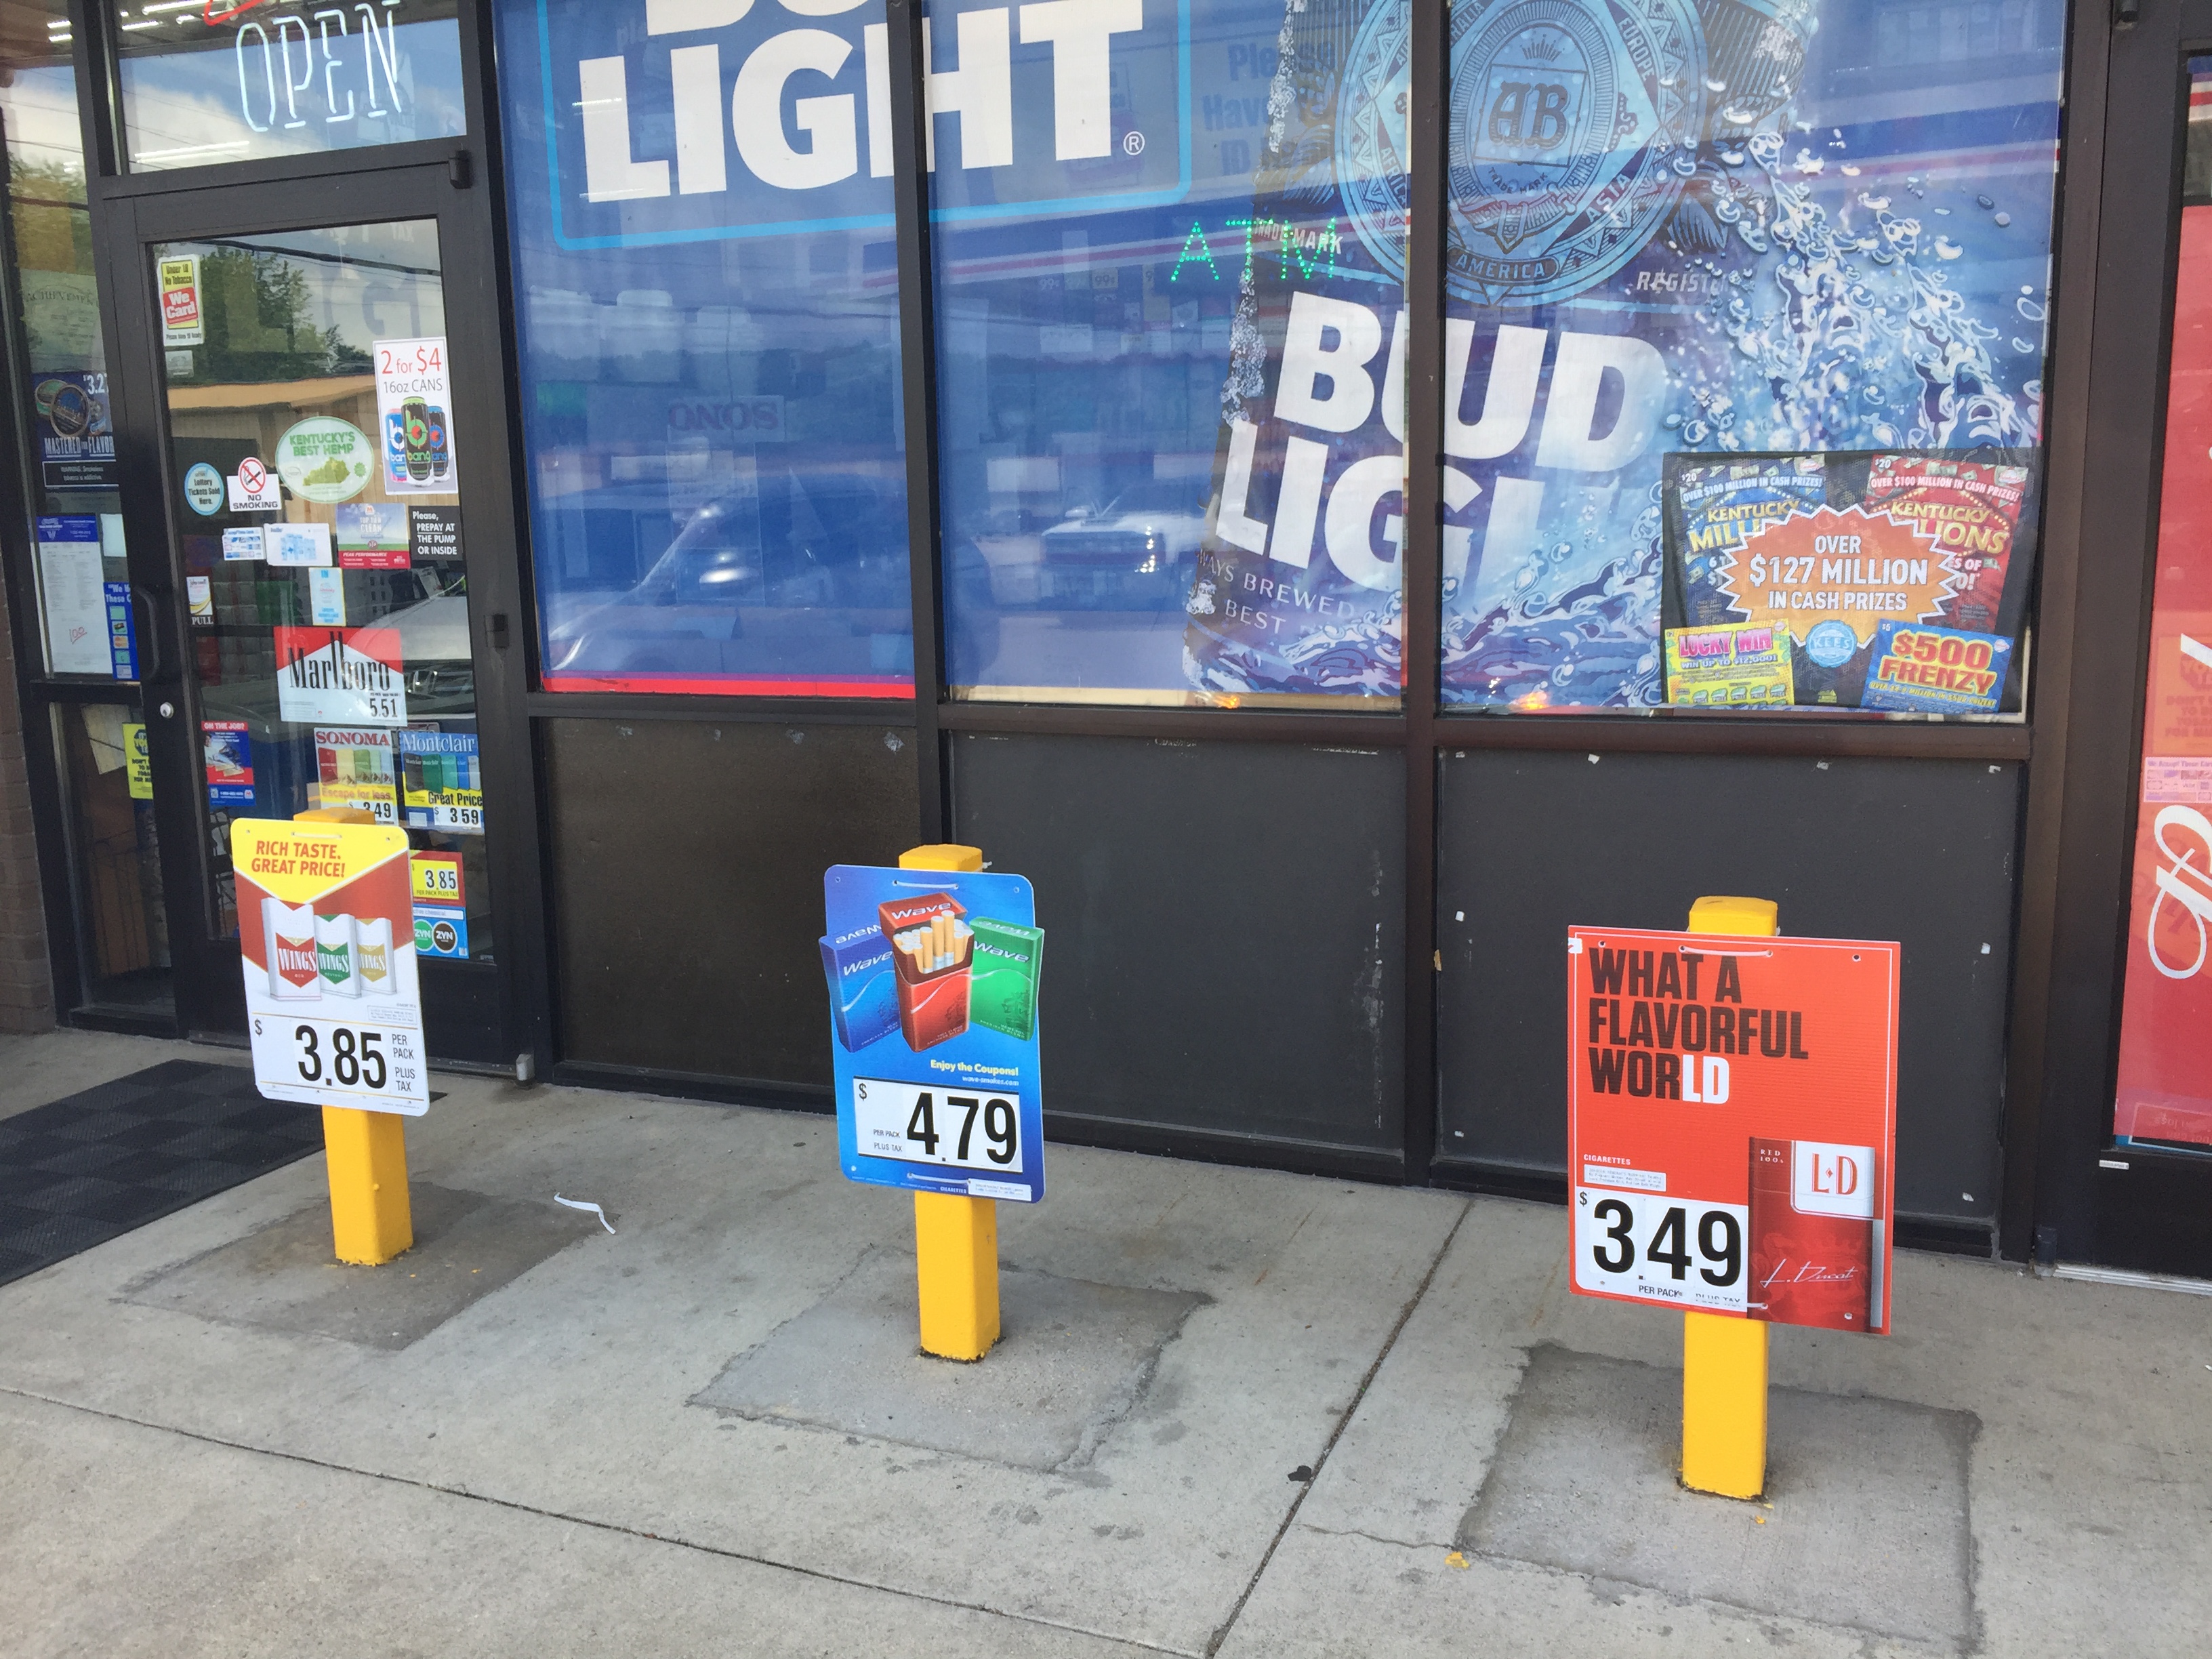 store exterior with Bud Light ads as well as cigarette ads 